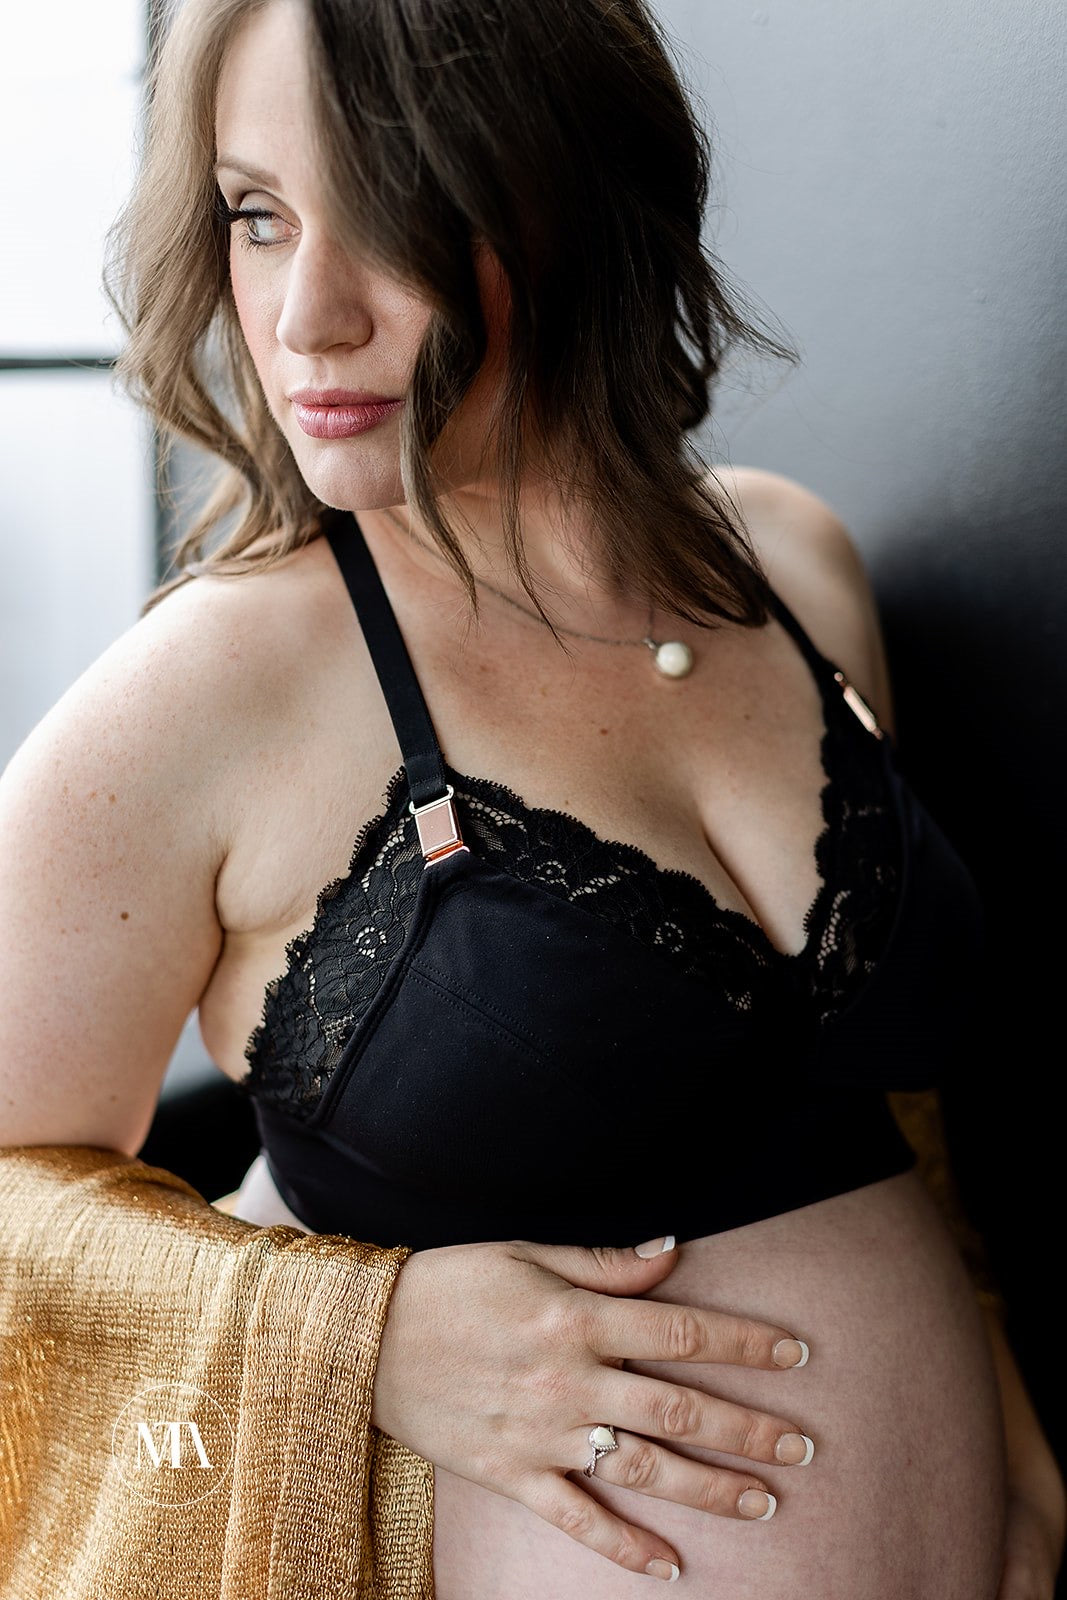 Expert Bra Fitting For Pregnancy and Breastfeeding